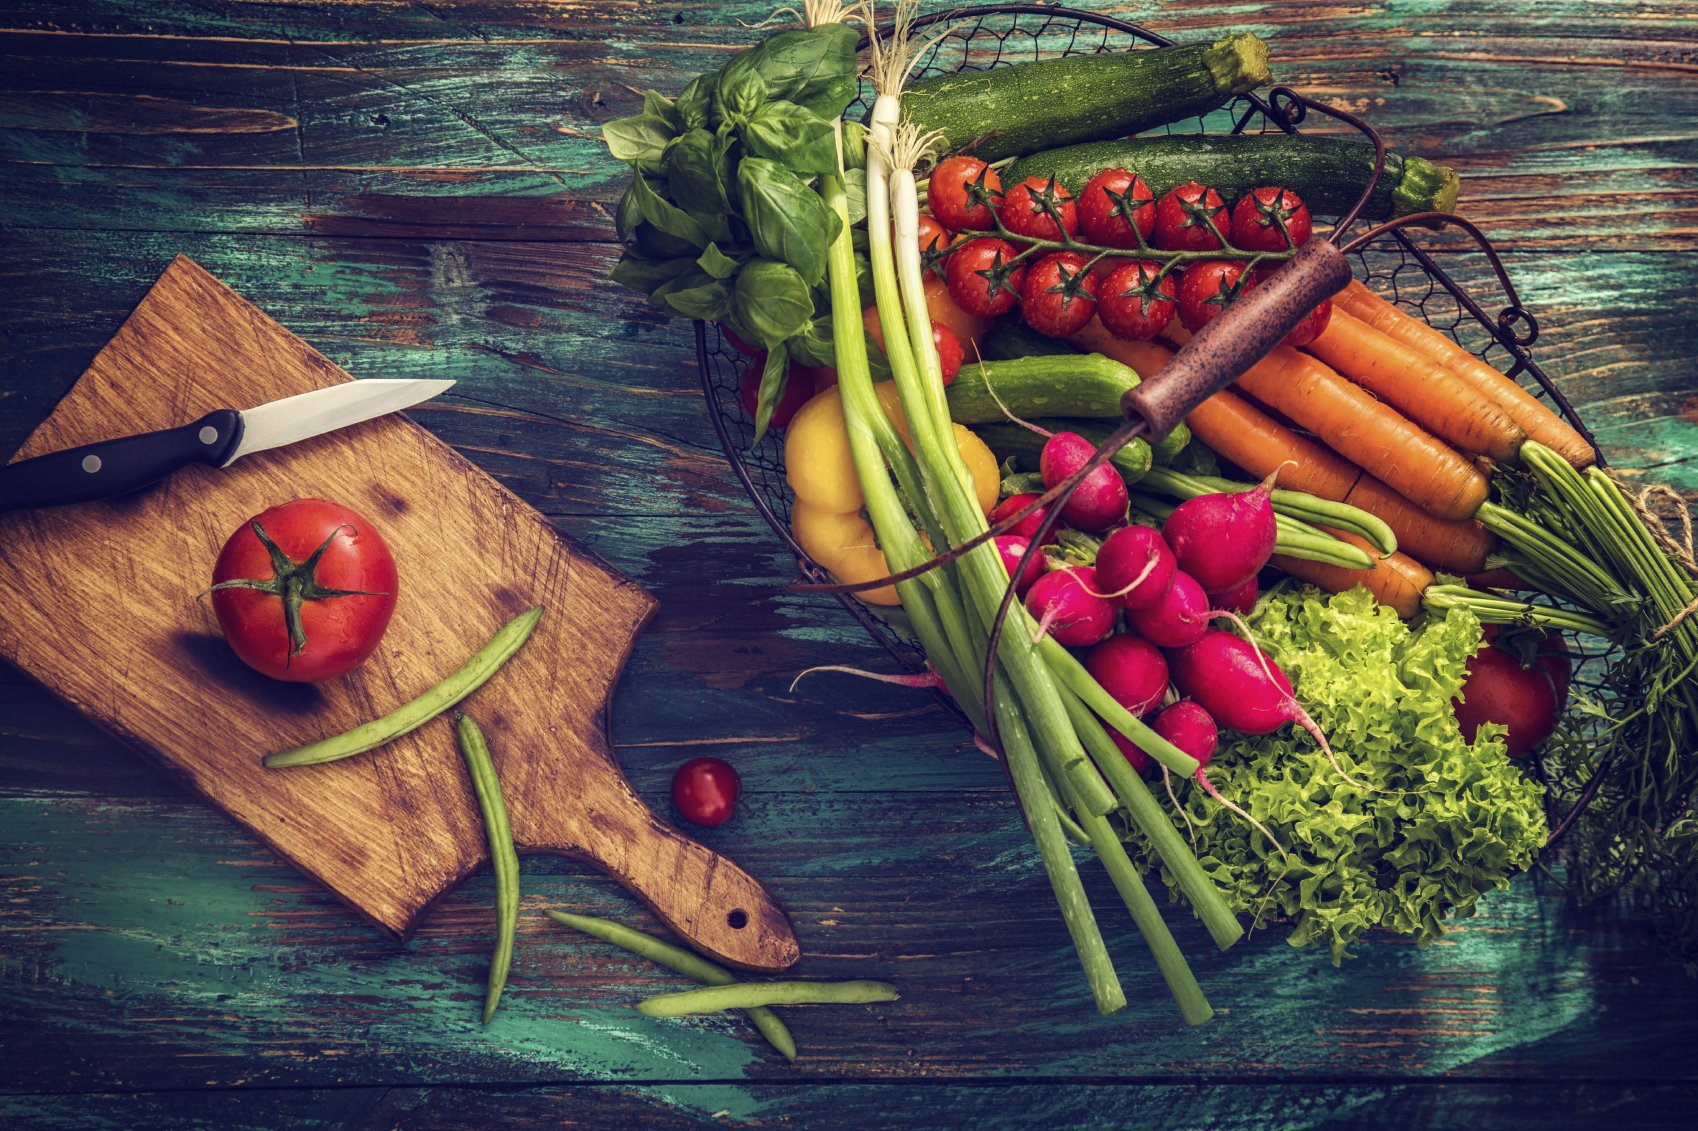 Phytochemicals give fruits and vegetables their bright colors